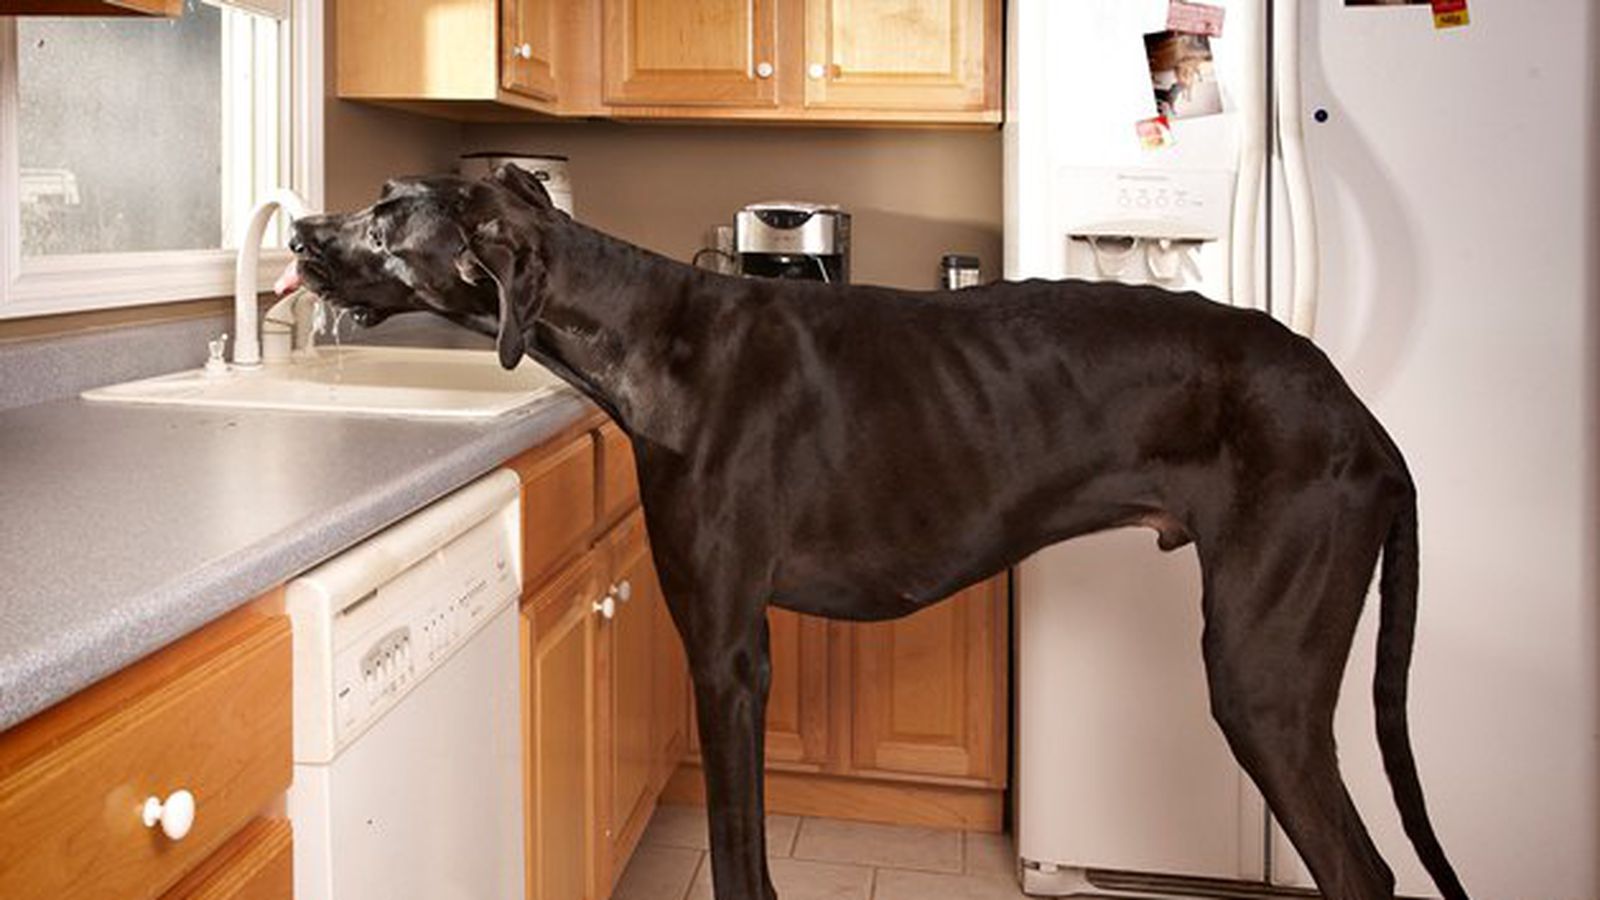 Great Dane - the largest dog